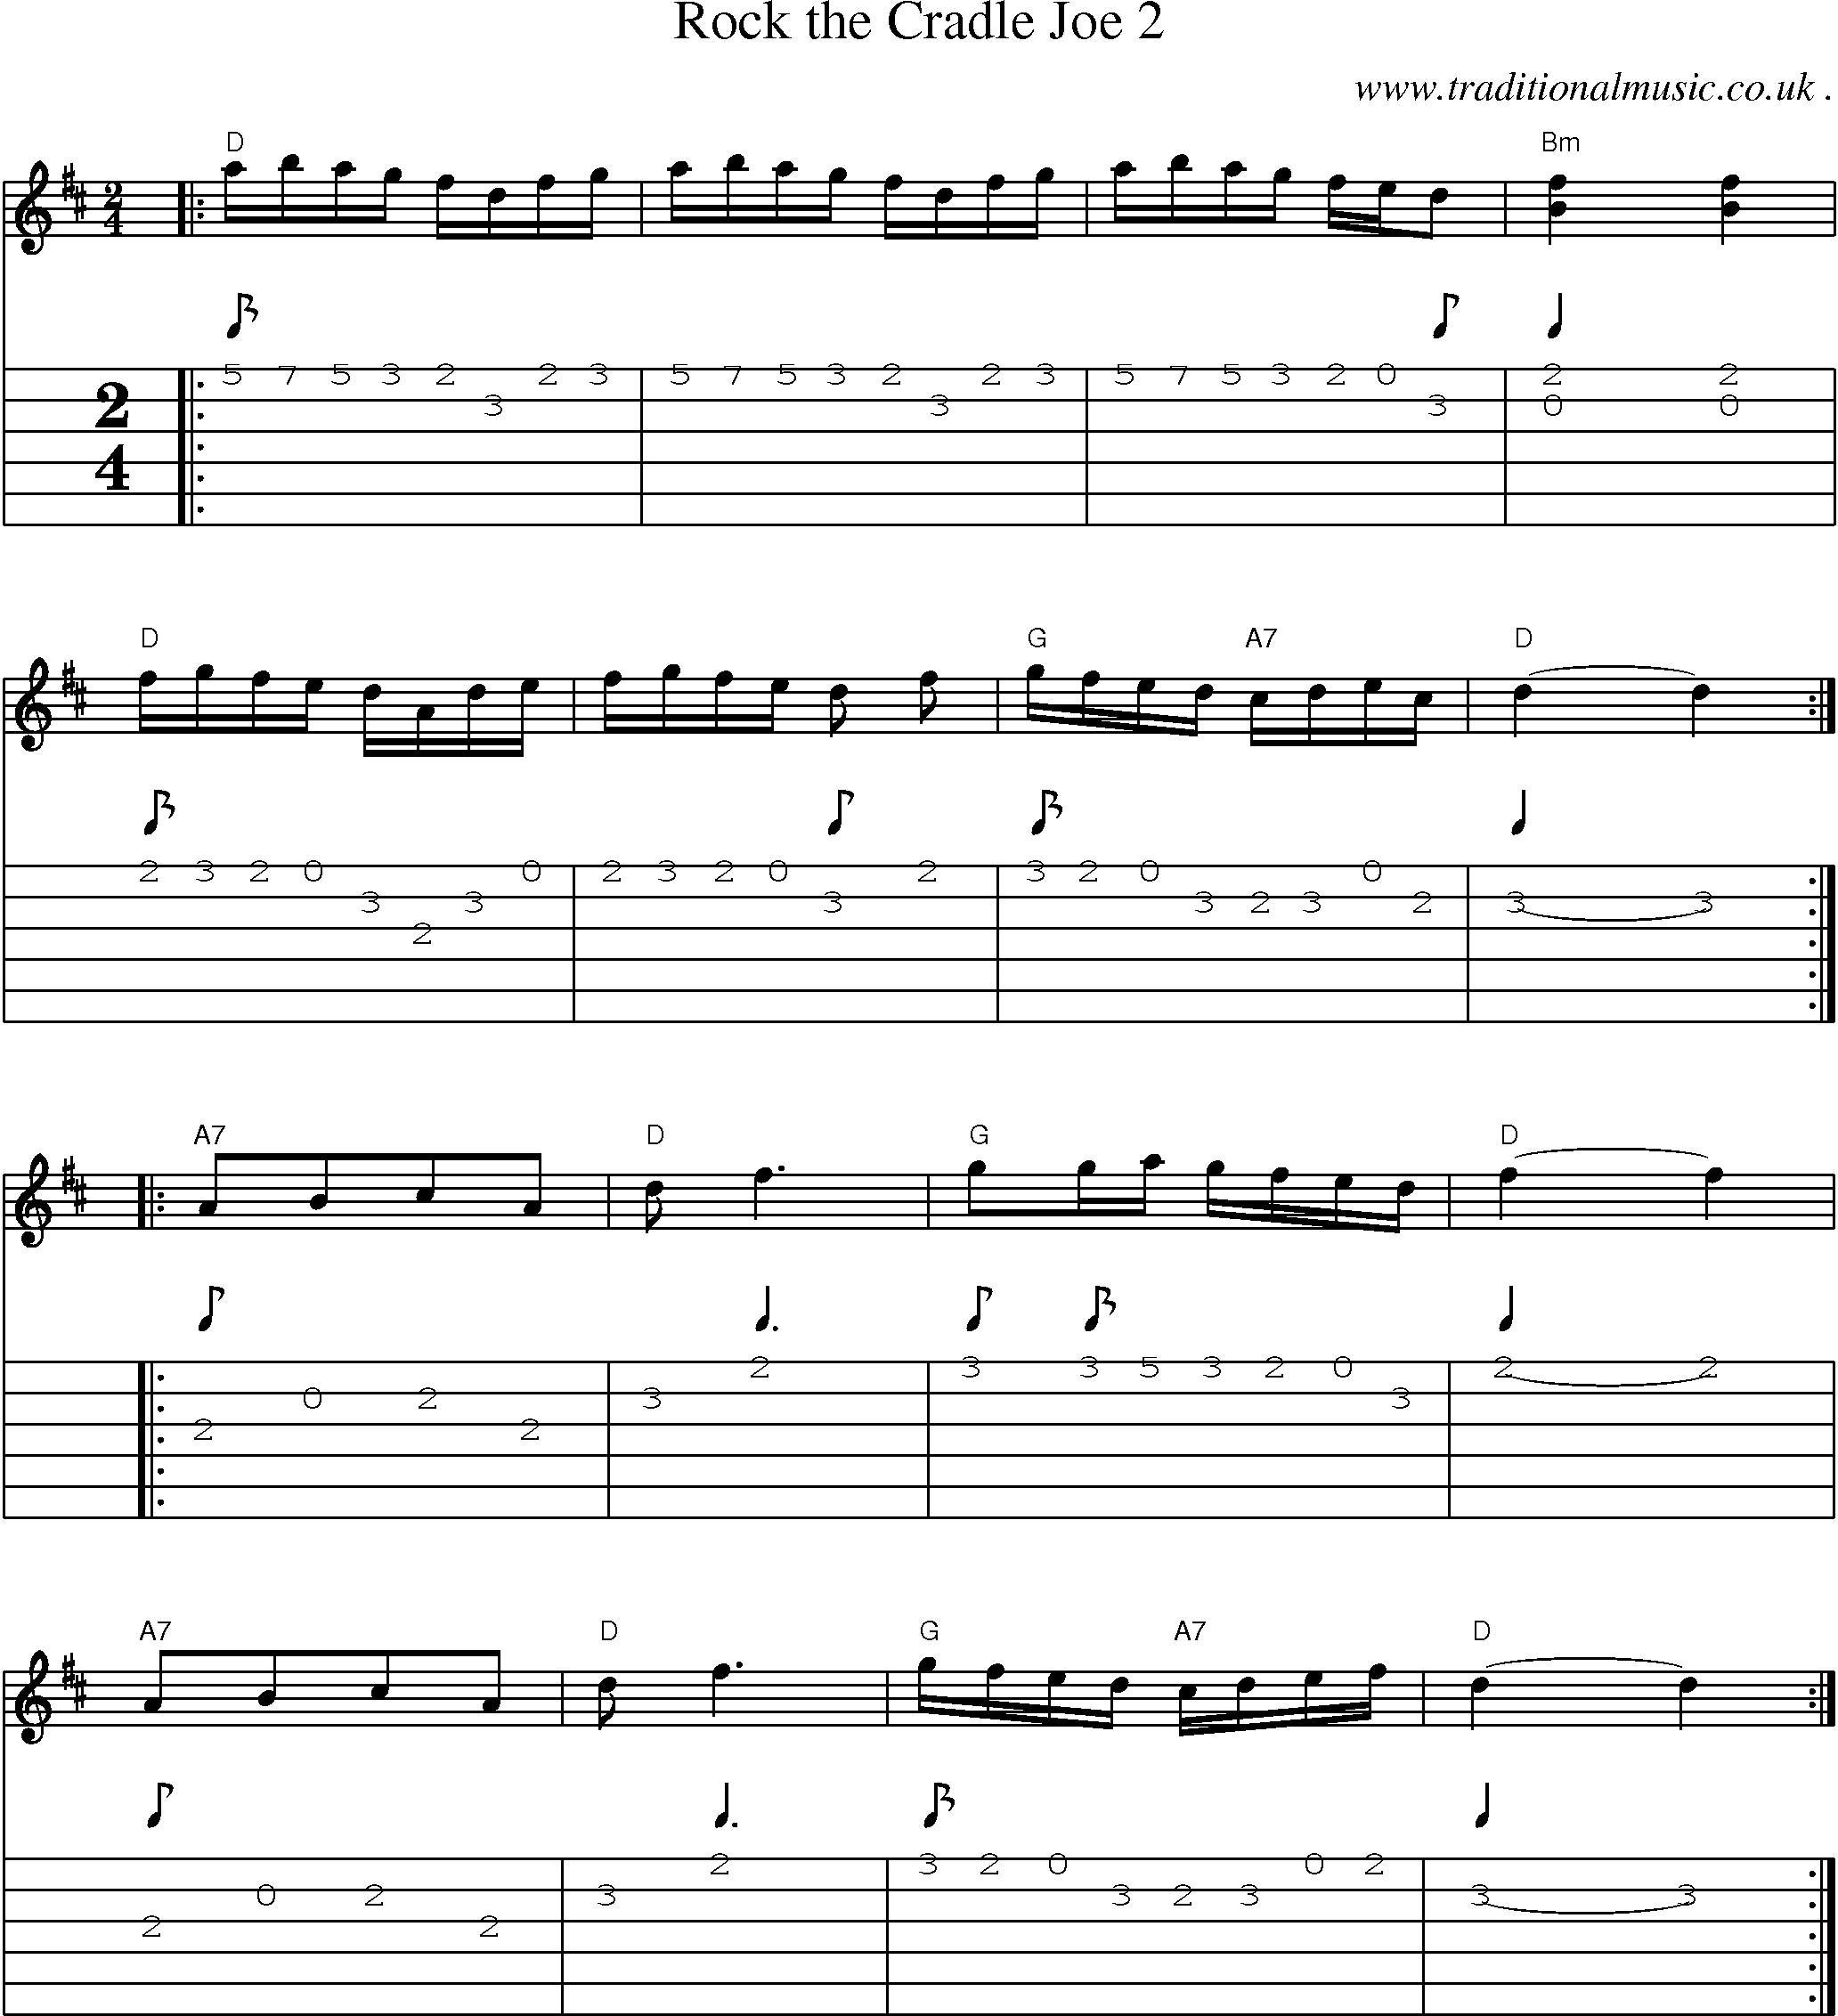 Music Score and Guitar Tabs for Rock The Cradle Joe 2